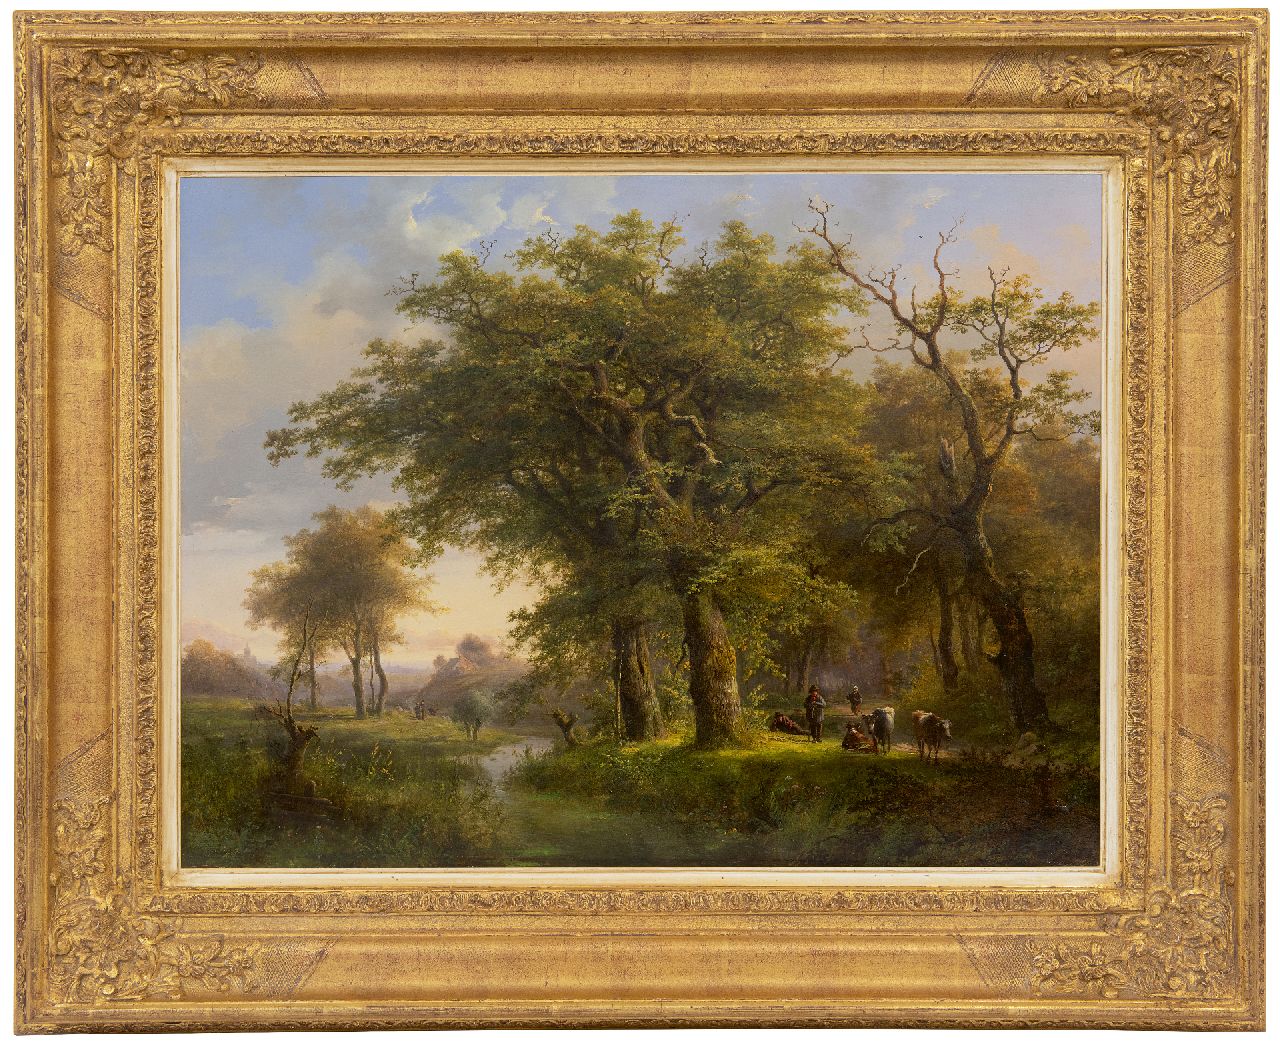 Klombeck J.B.  | Johann Bernard Klombeck, Forest landscape with cattle and country folk, oil on panel 47.6 x 62.5 cm, signed l.l. and dated 1857